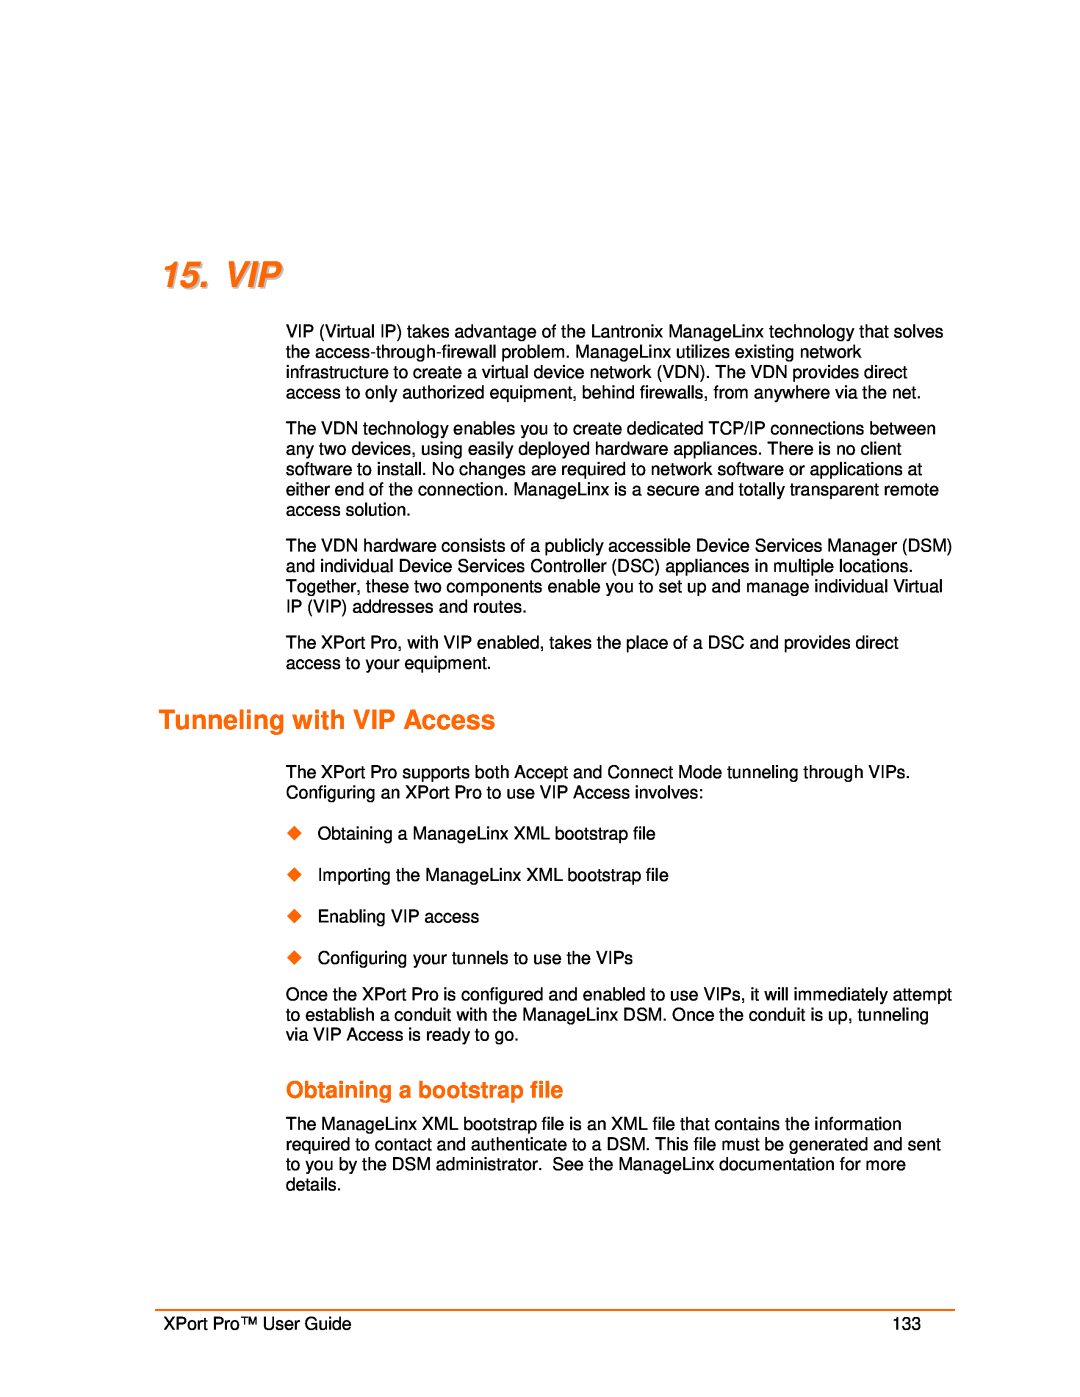 Lantronix 900-560 manual Vip, Tunneling with VIP Access, Obtaining a bootstrap file 